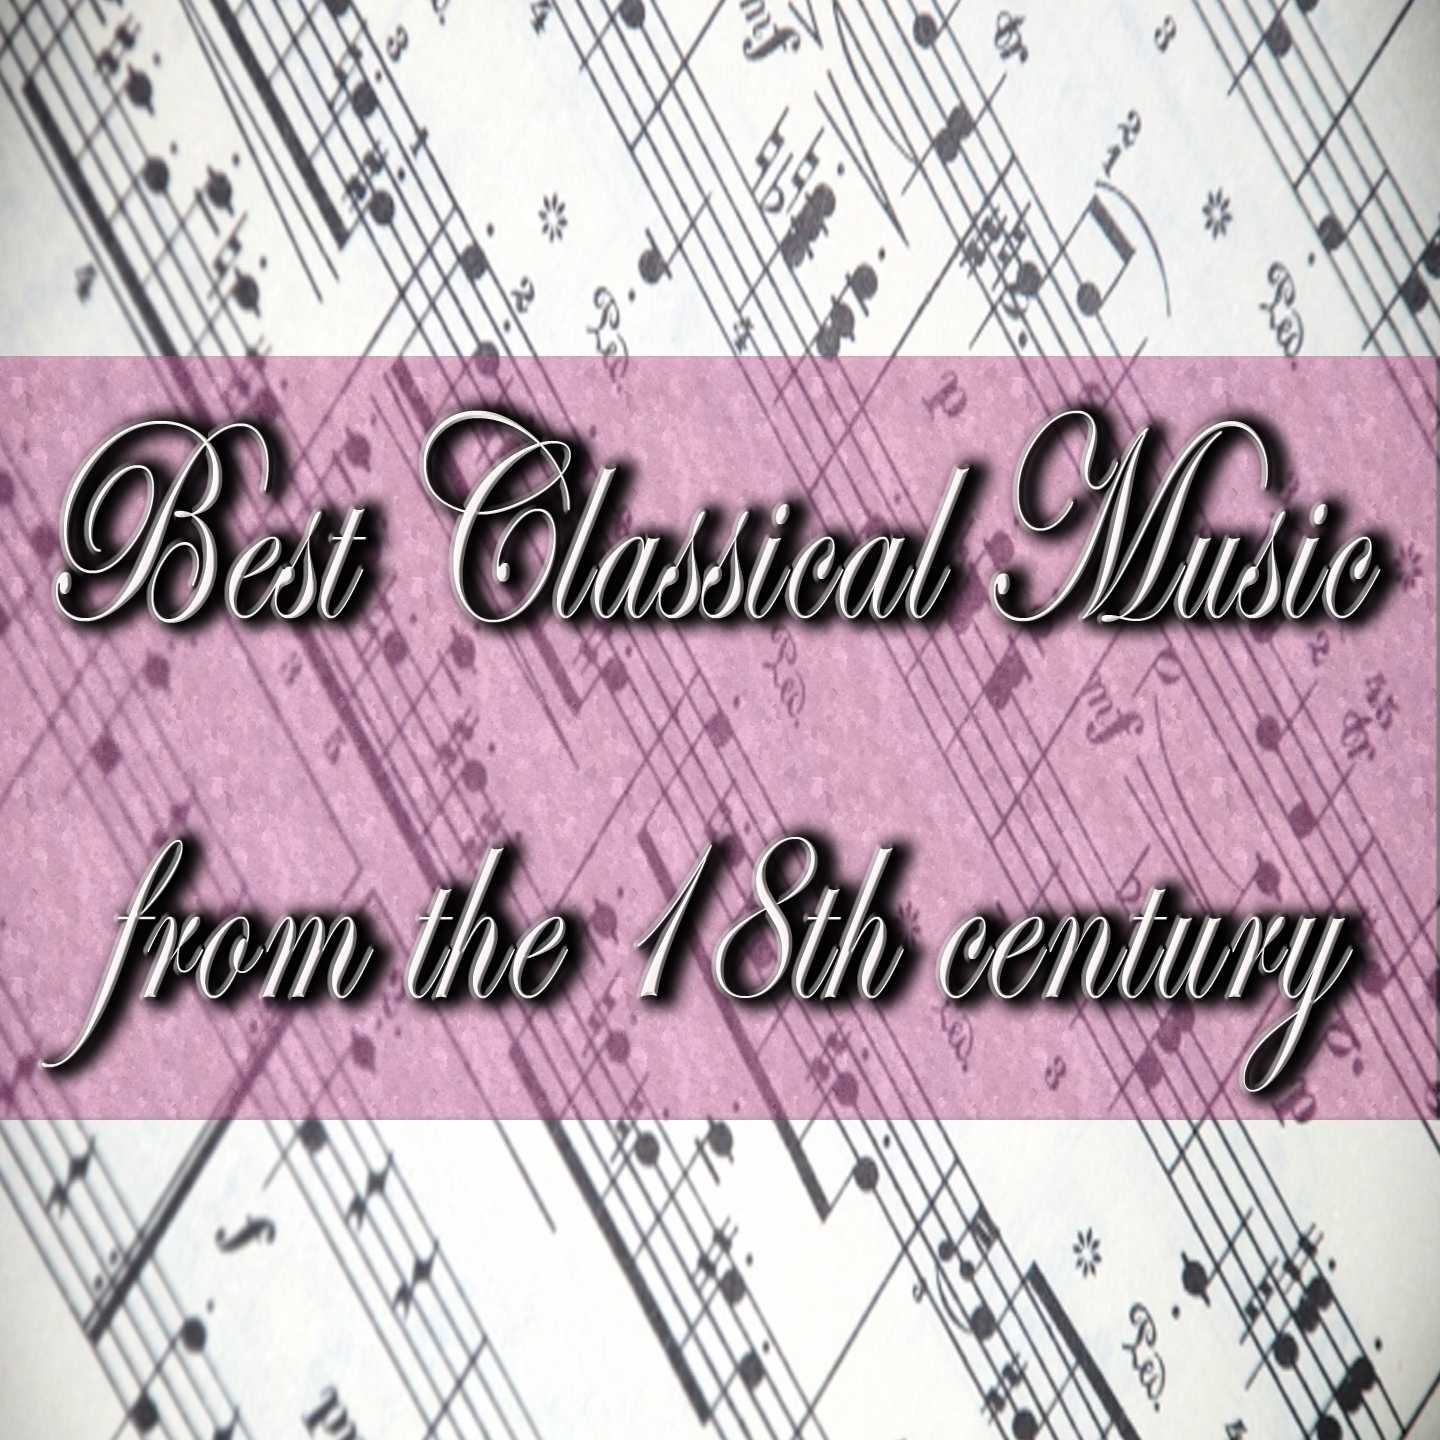 Best Classical Music from the 18th Century